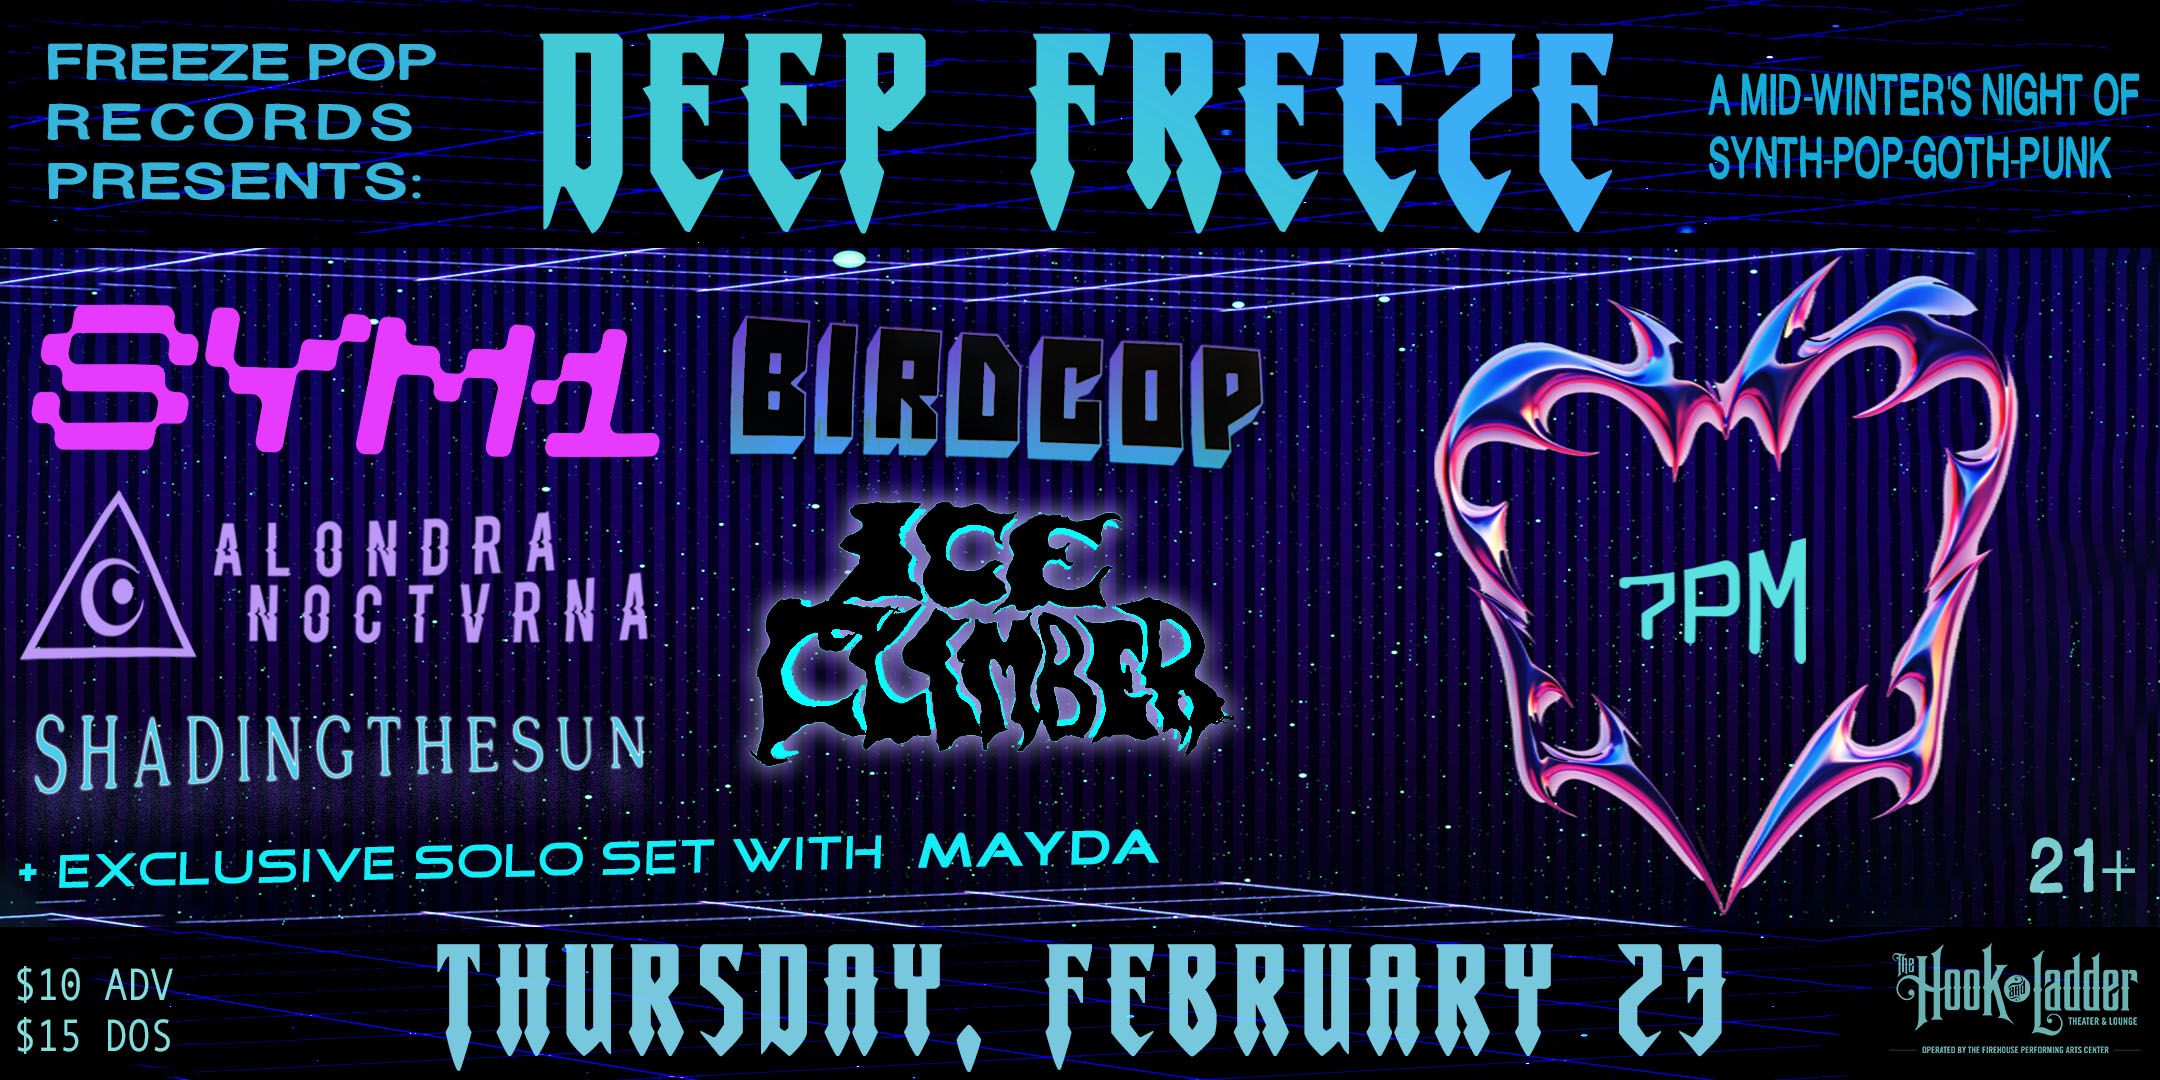 Freeze Pop Records Presents: Deep Freeze A Mid-Winter’s Night of Synth, Goth, Pop, and Punk! with SYM1, Ice Climber, Shadingofthesun, Alondra Noctvrn, MAYDA, & Birdcop Thursday, February 23rd The Hook and Ladder Theater Doors 7:00pm :: Music 7:30pm :: 21+ General Admission * $10 ADV / $15 DOS * Does not include fees NO REFUNDS